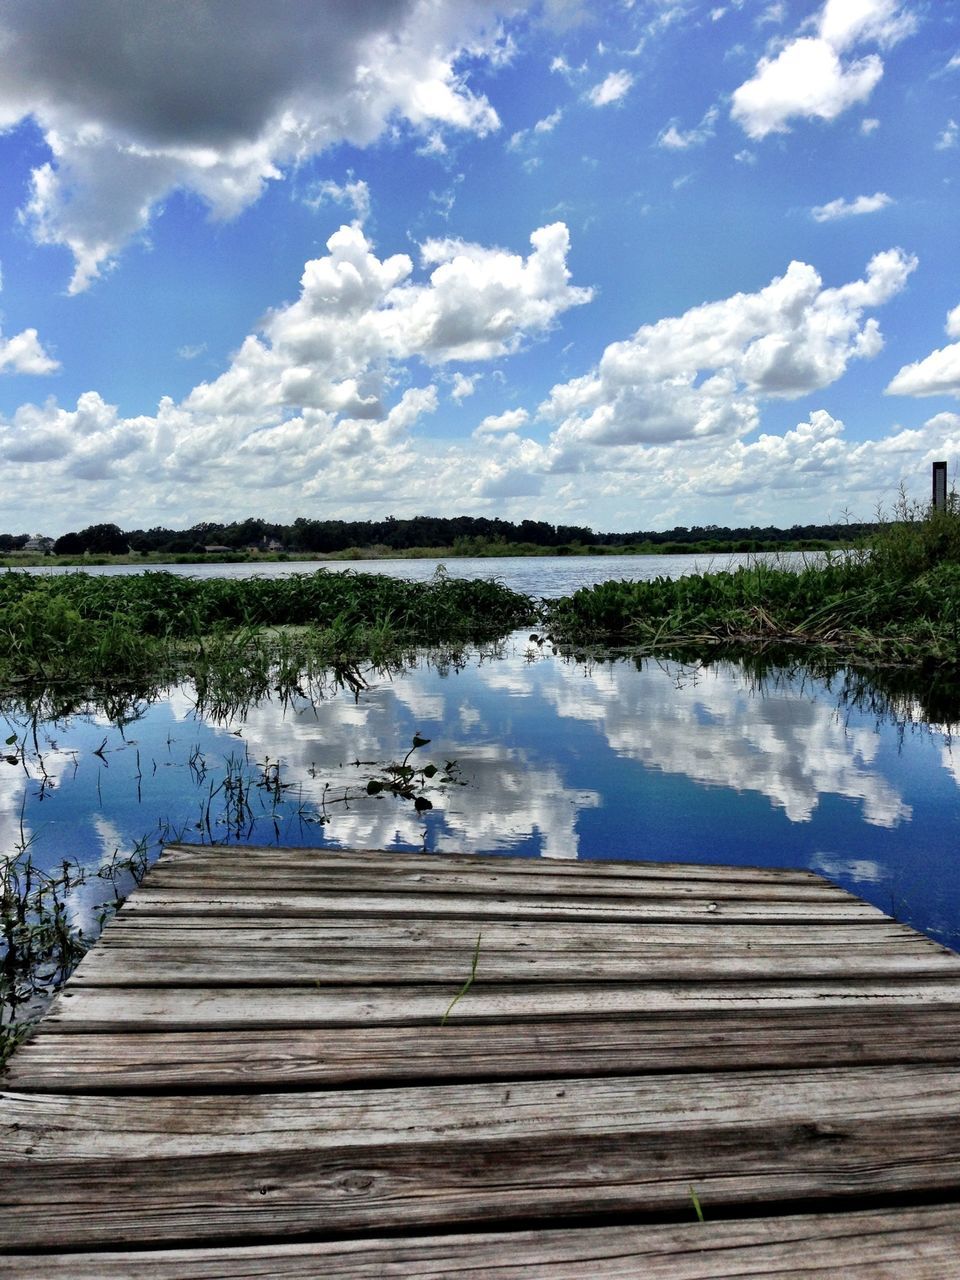 water, sky, lake, tranquil scene, reflection, tranquility, cloud - sky, blue, beauty in nature, scenics, cloud, nature, pier, wood - material, tree, boardwalk, idyllic, cloudy, day, jetty